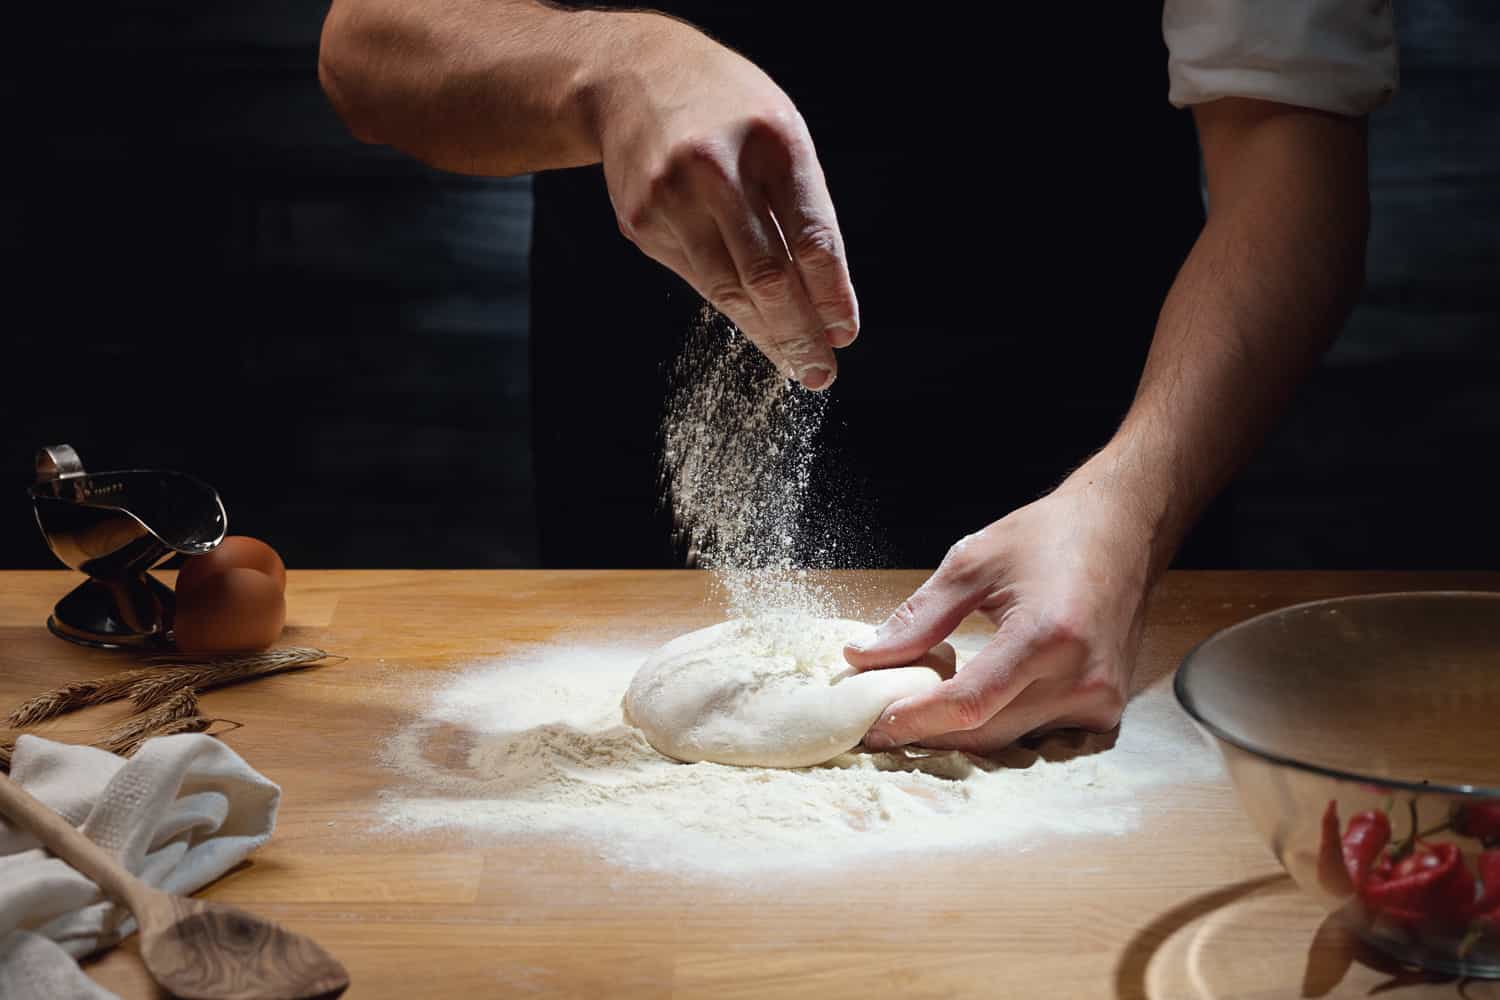 Cook hands kneading dough, sprinkling piece of dough with white wheat flour.